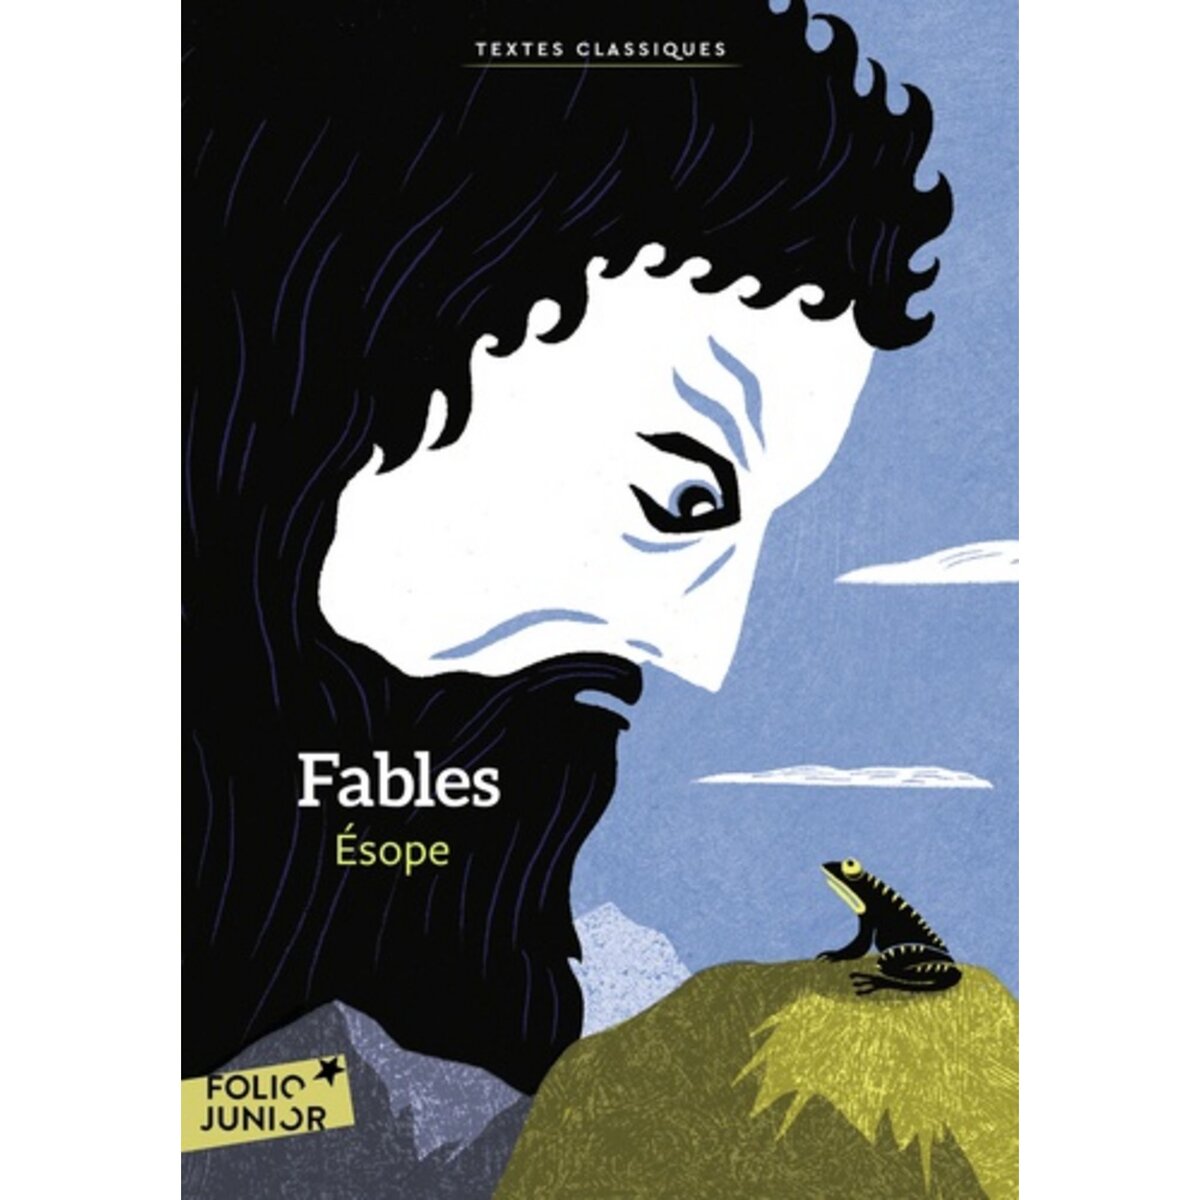  FABLES, Esope